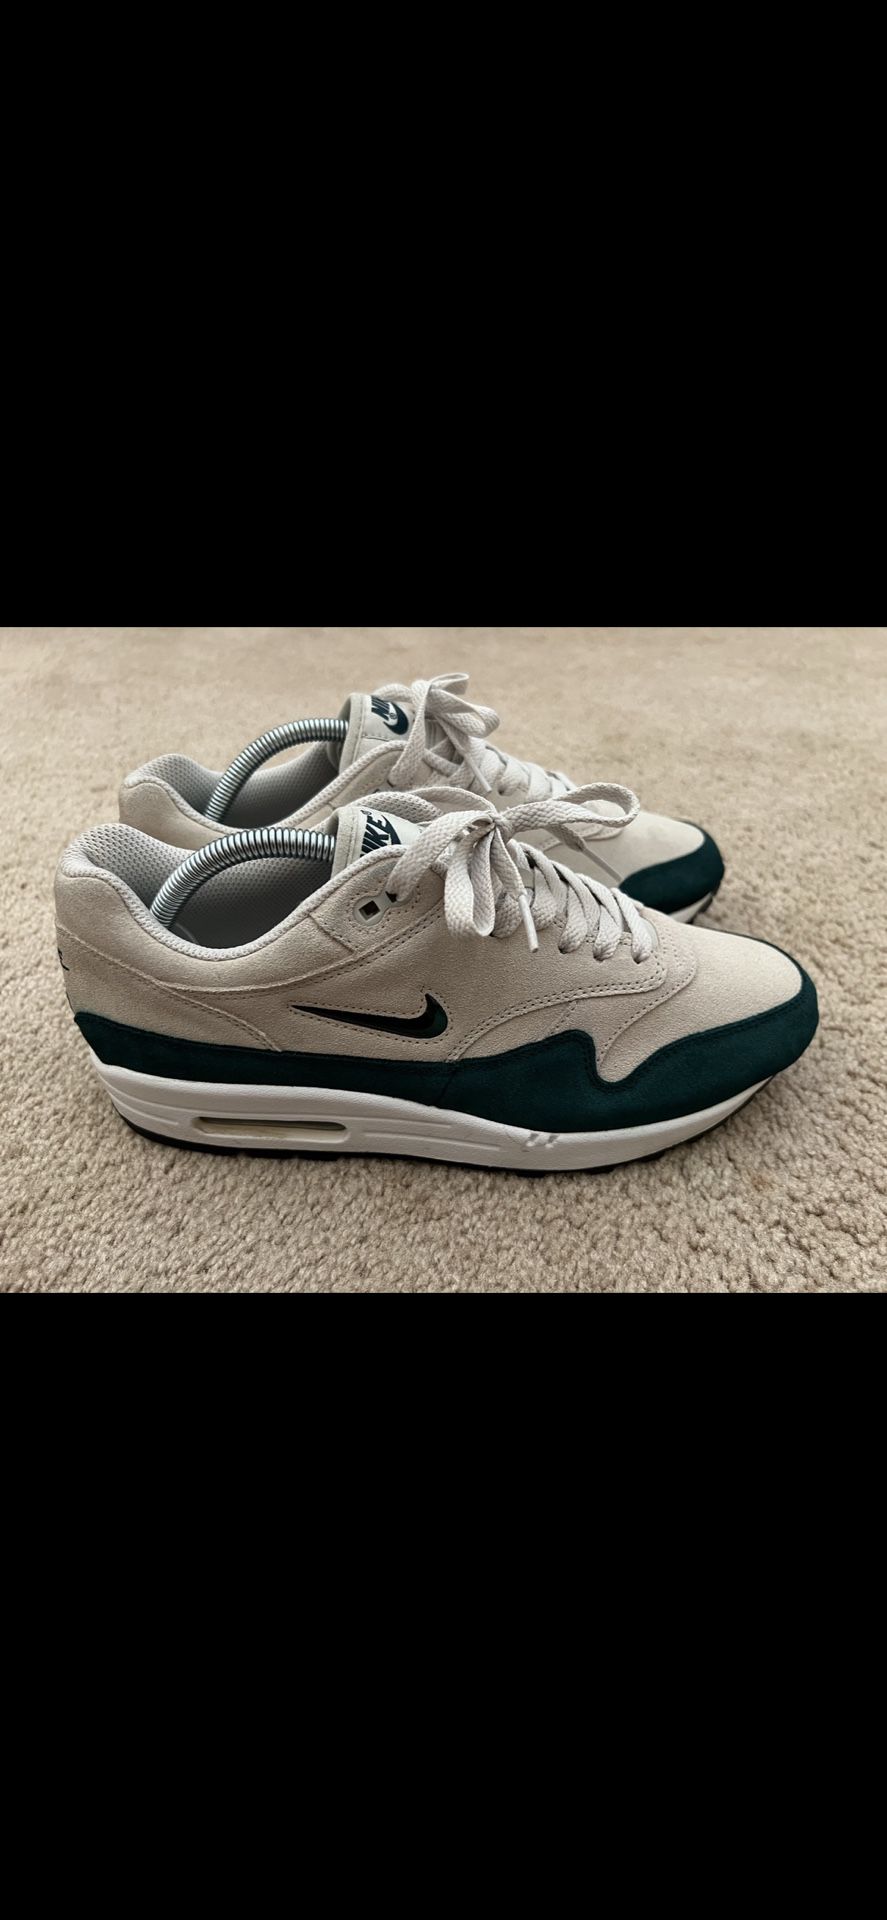 Air Max Jewel 'Atomic Teal' sz 8.5 US for Artesia, - OfferUp